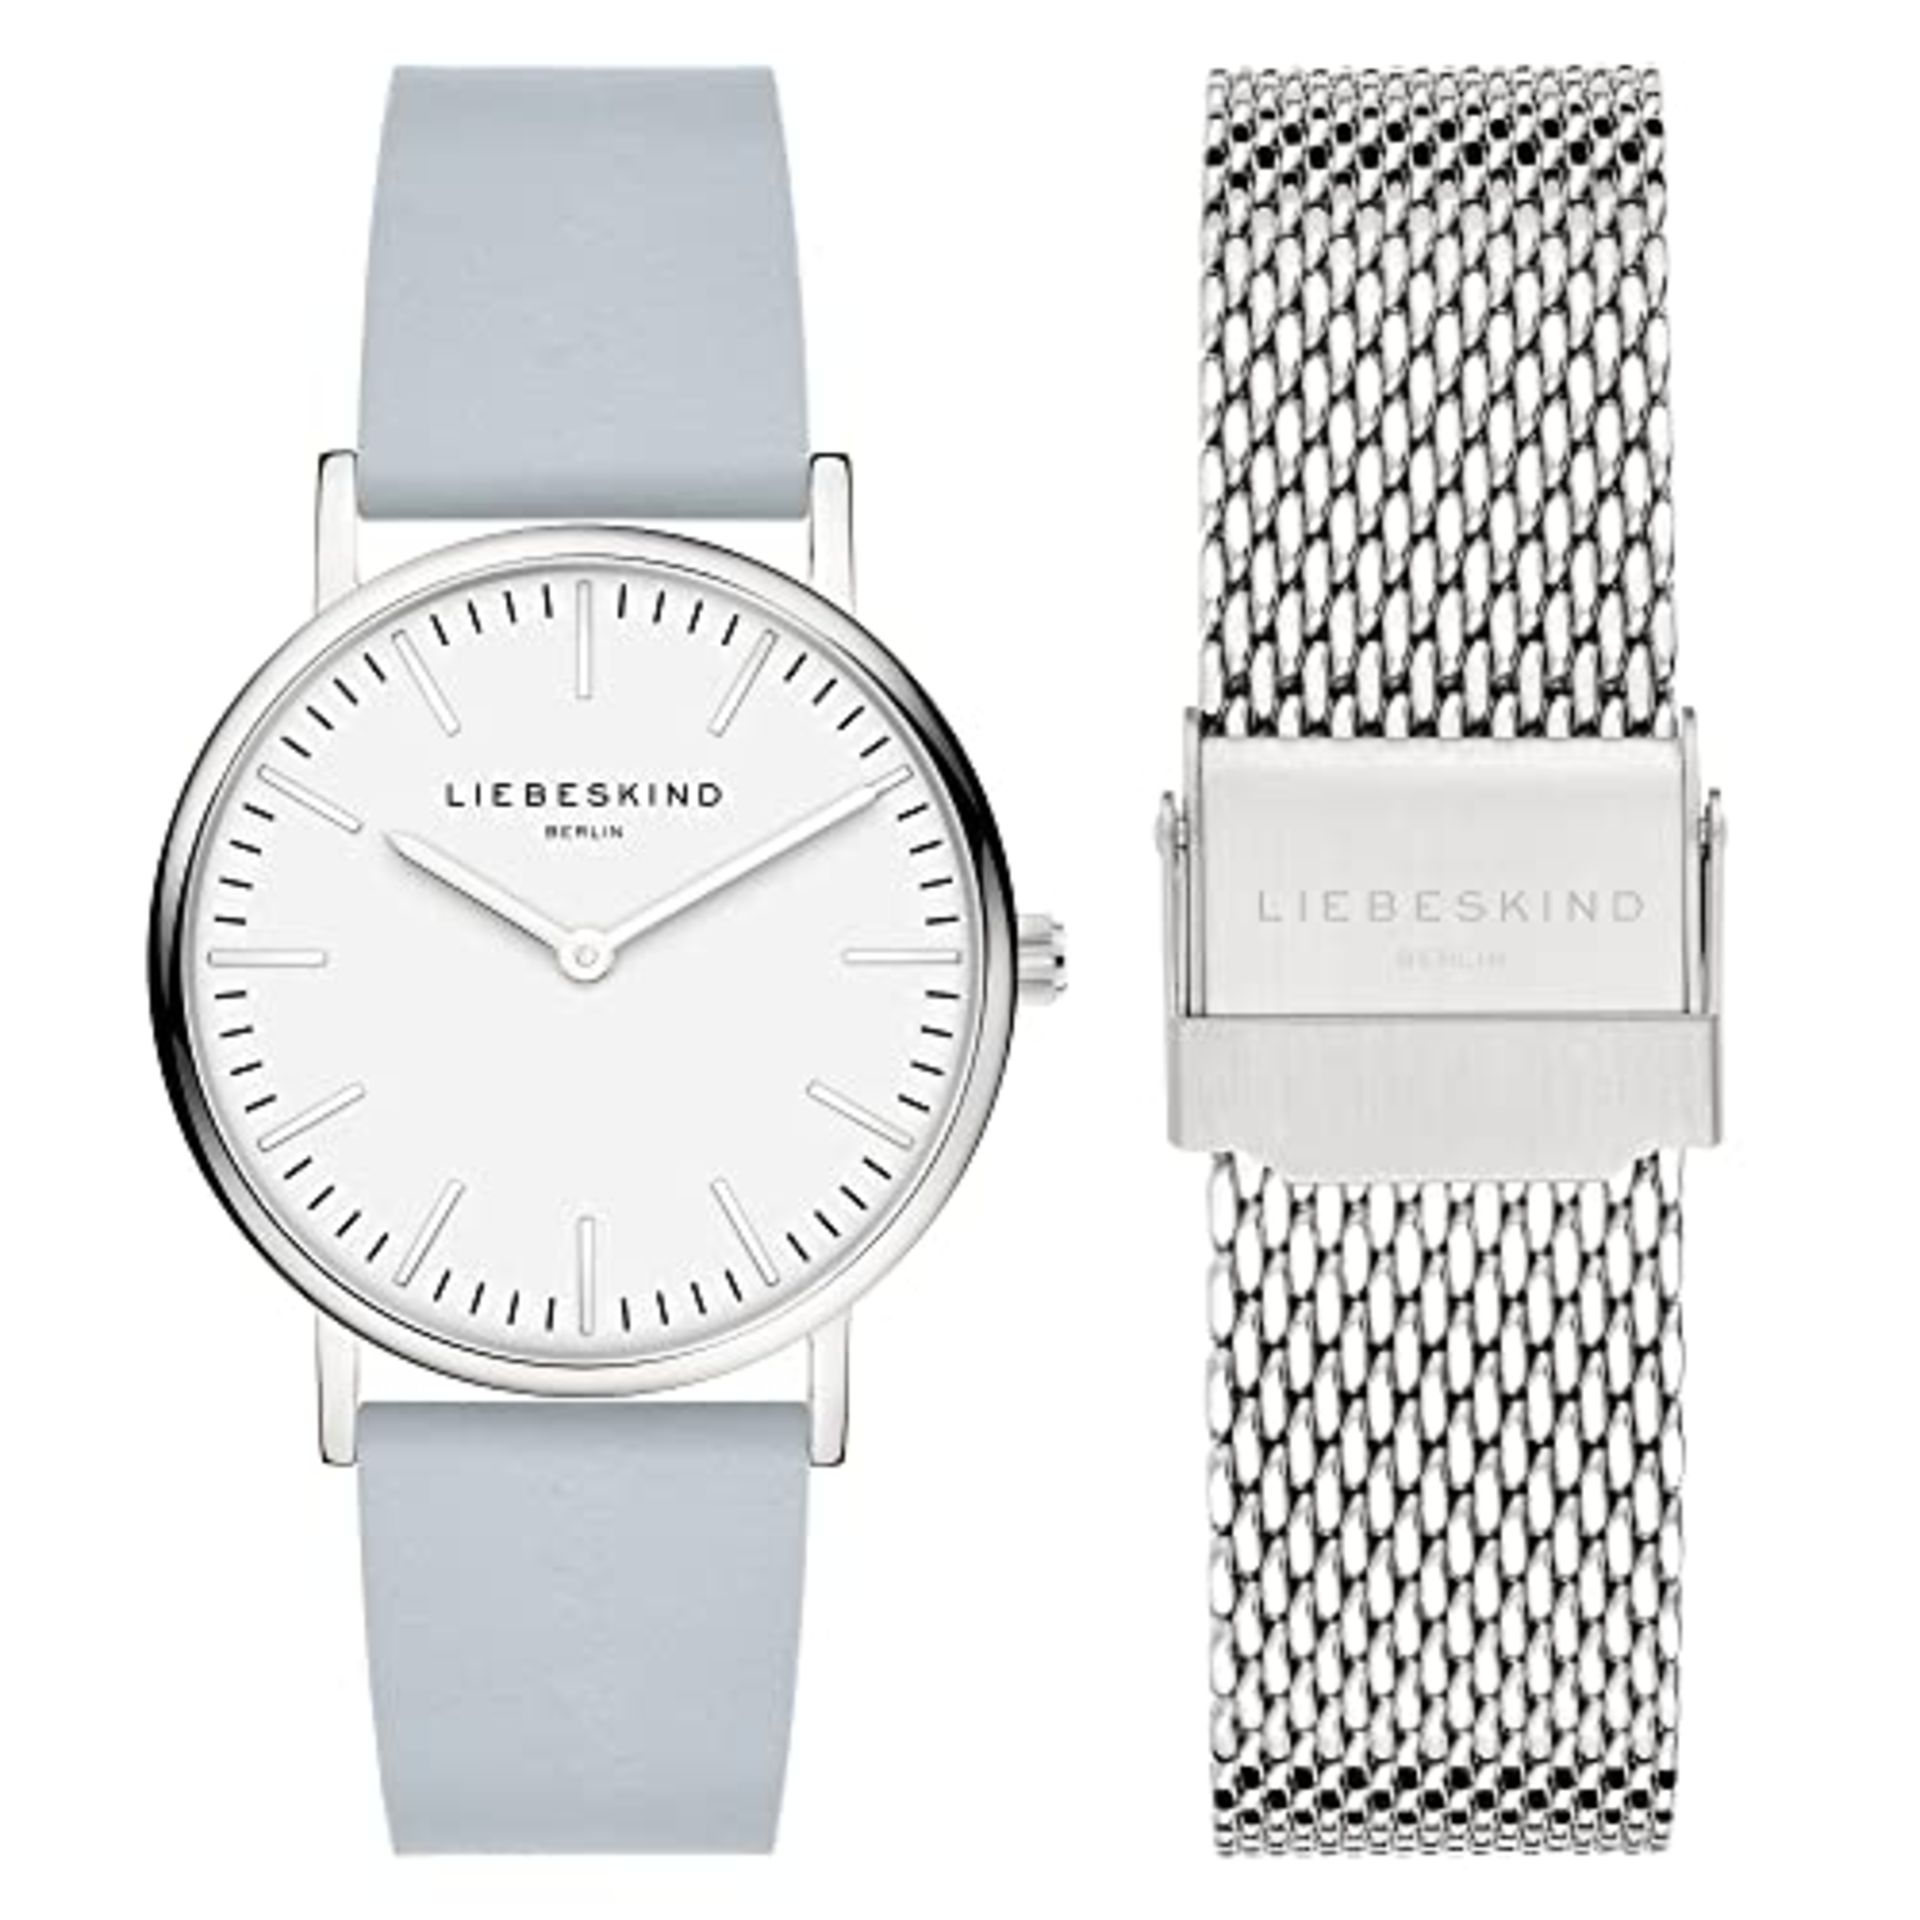 RRP £136.00 "Lovechild Ladies Analog Quartz Watch with Leather, Stainless Steel Bracelet LS-0964-M